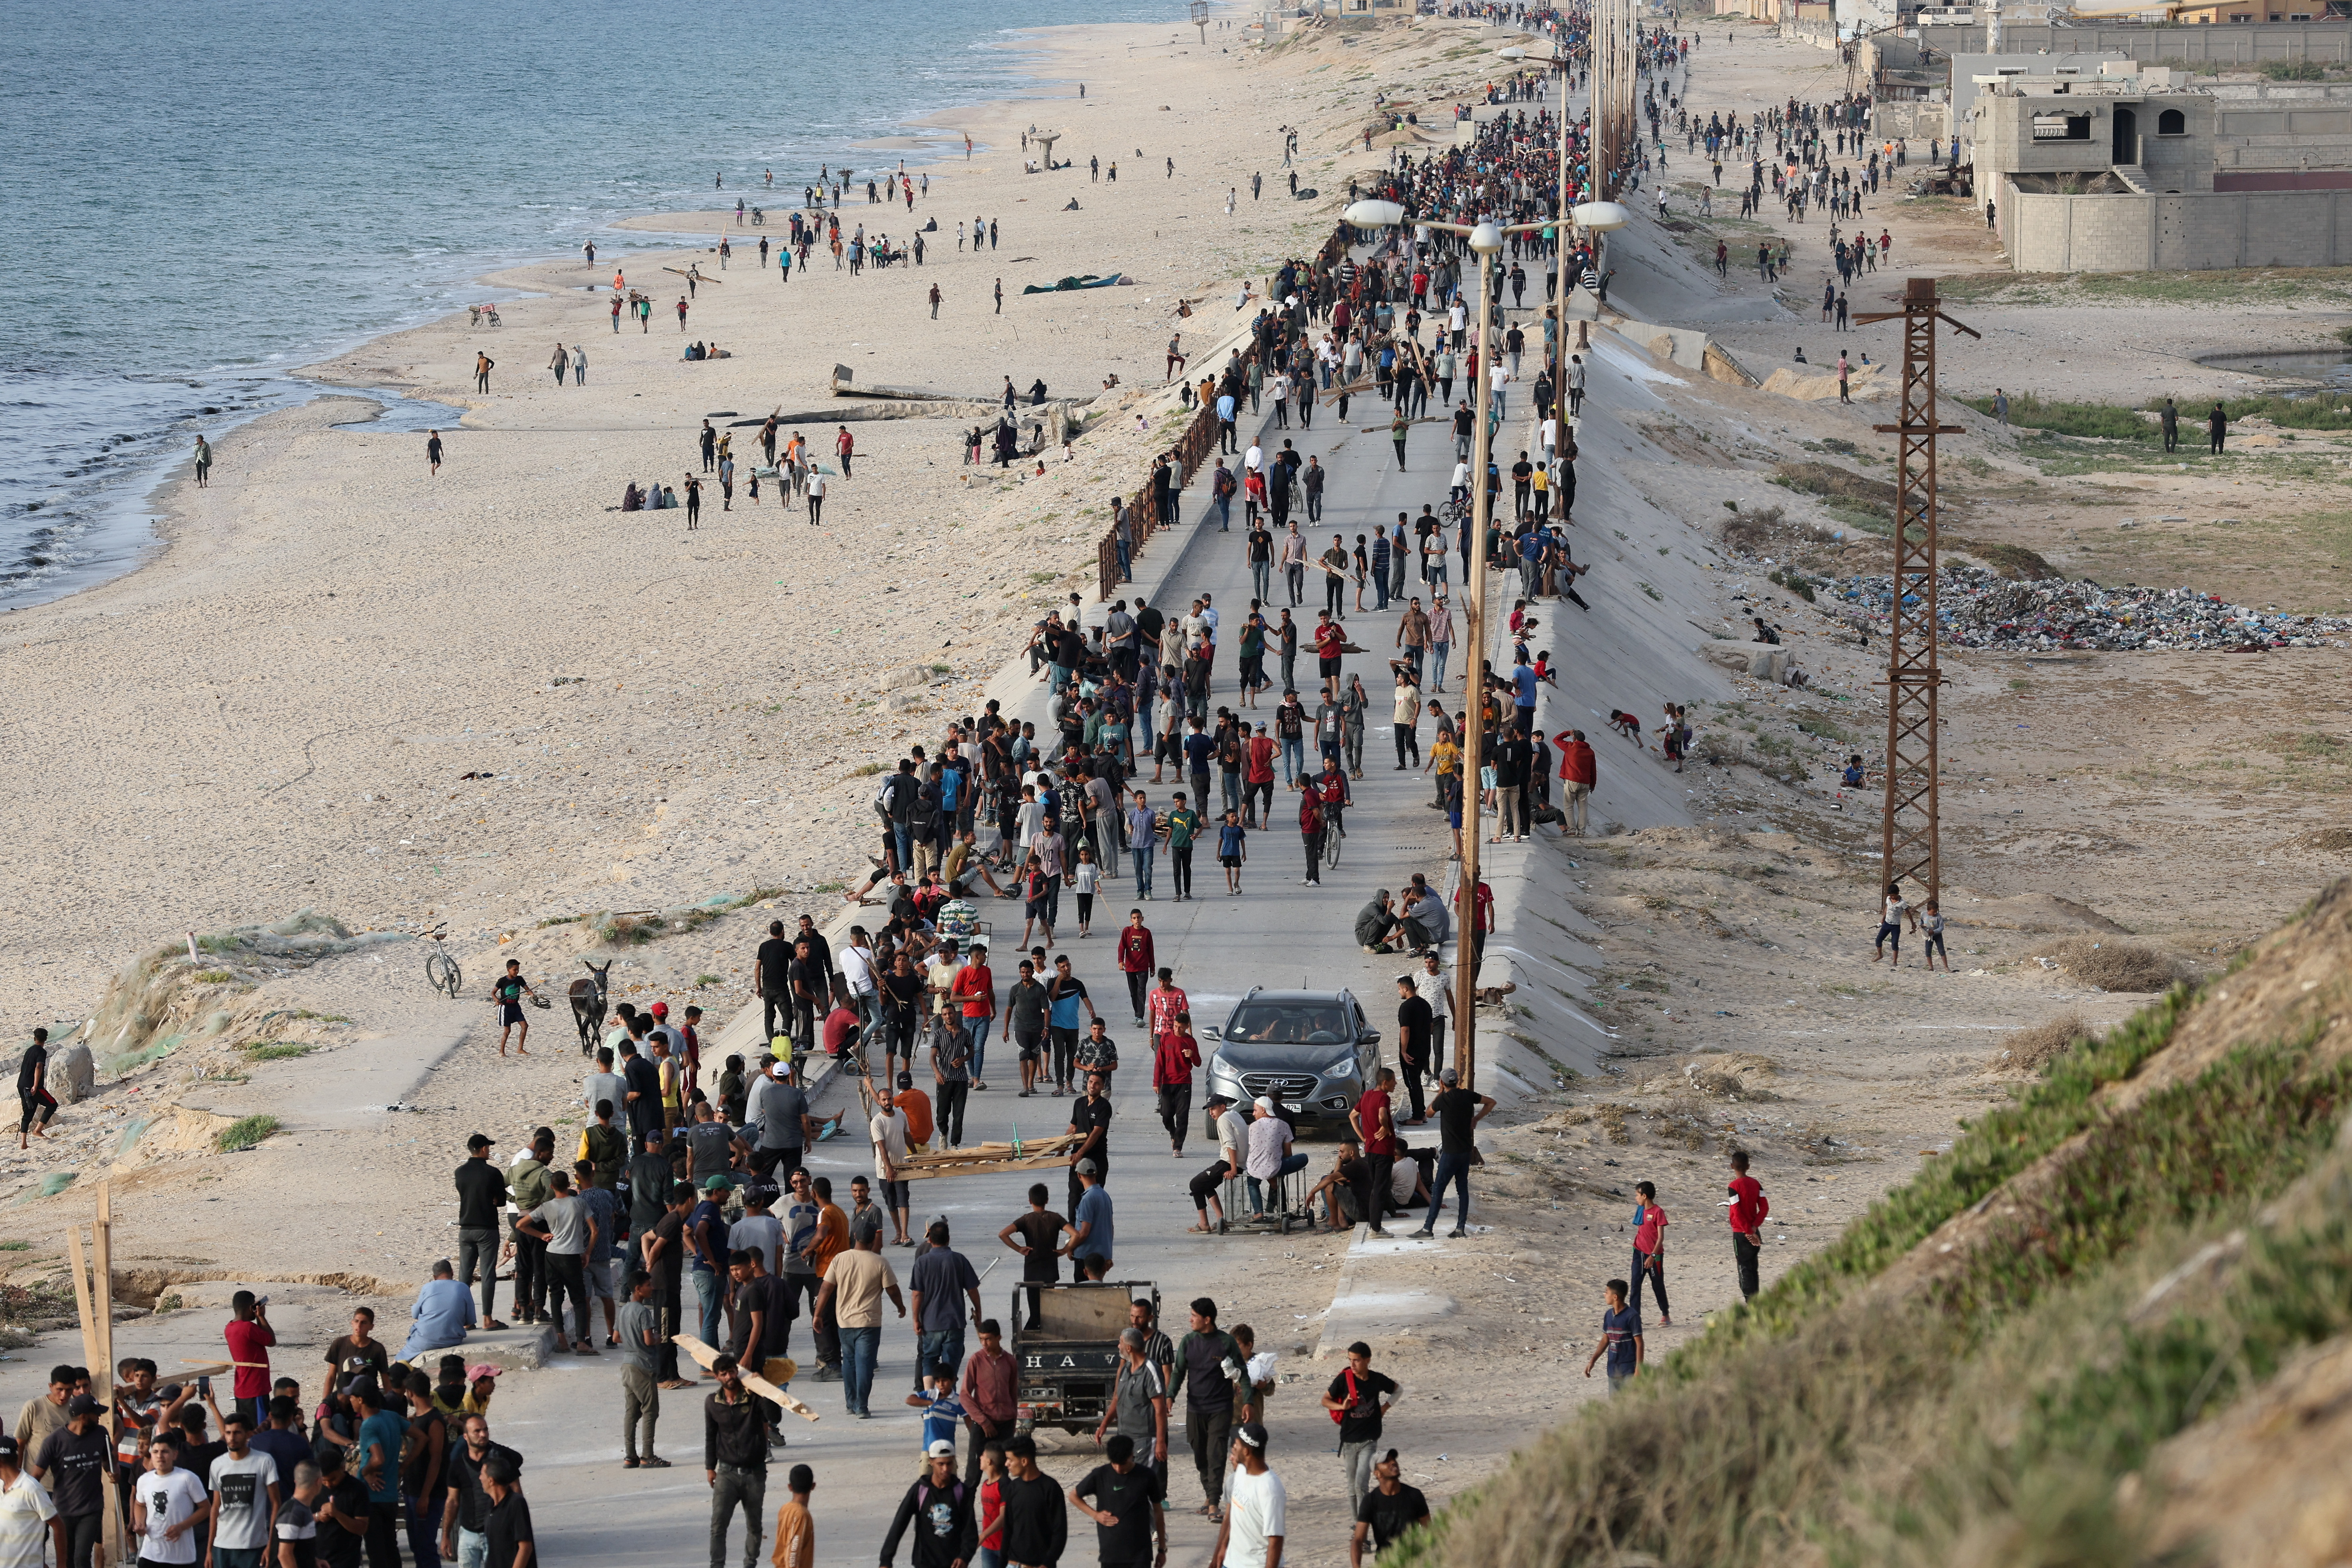 Palestinians gather in the hope of obtaining aid delivered into Gaza through a U.S.-built pier, as seen from central Gaza Strip